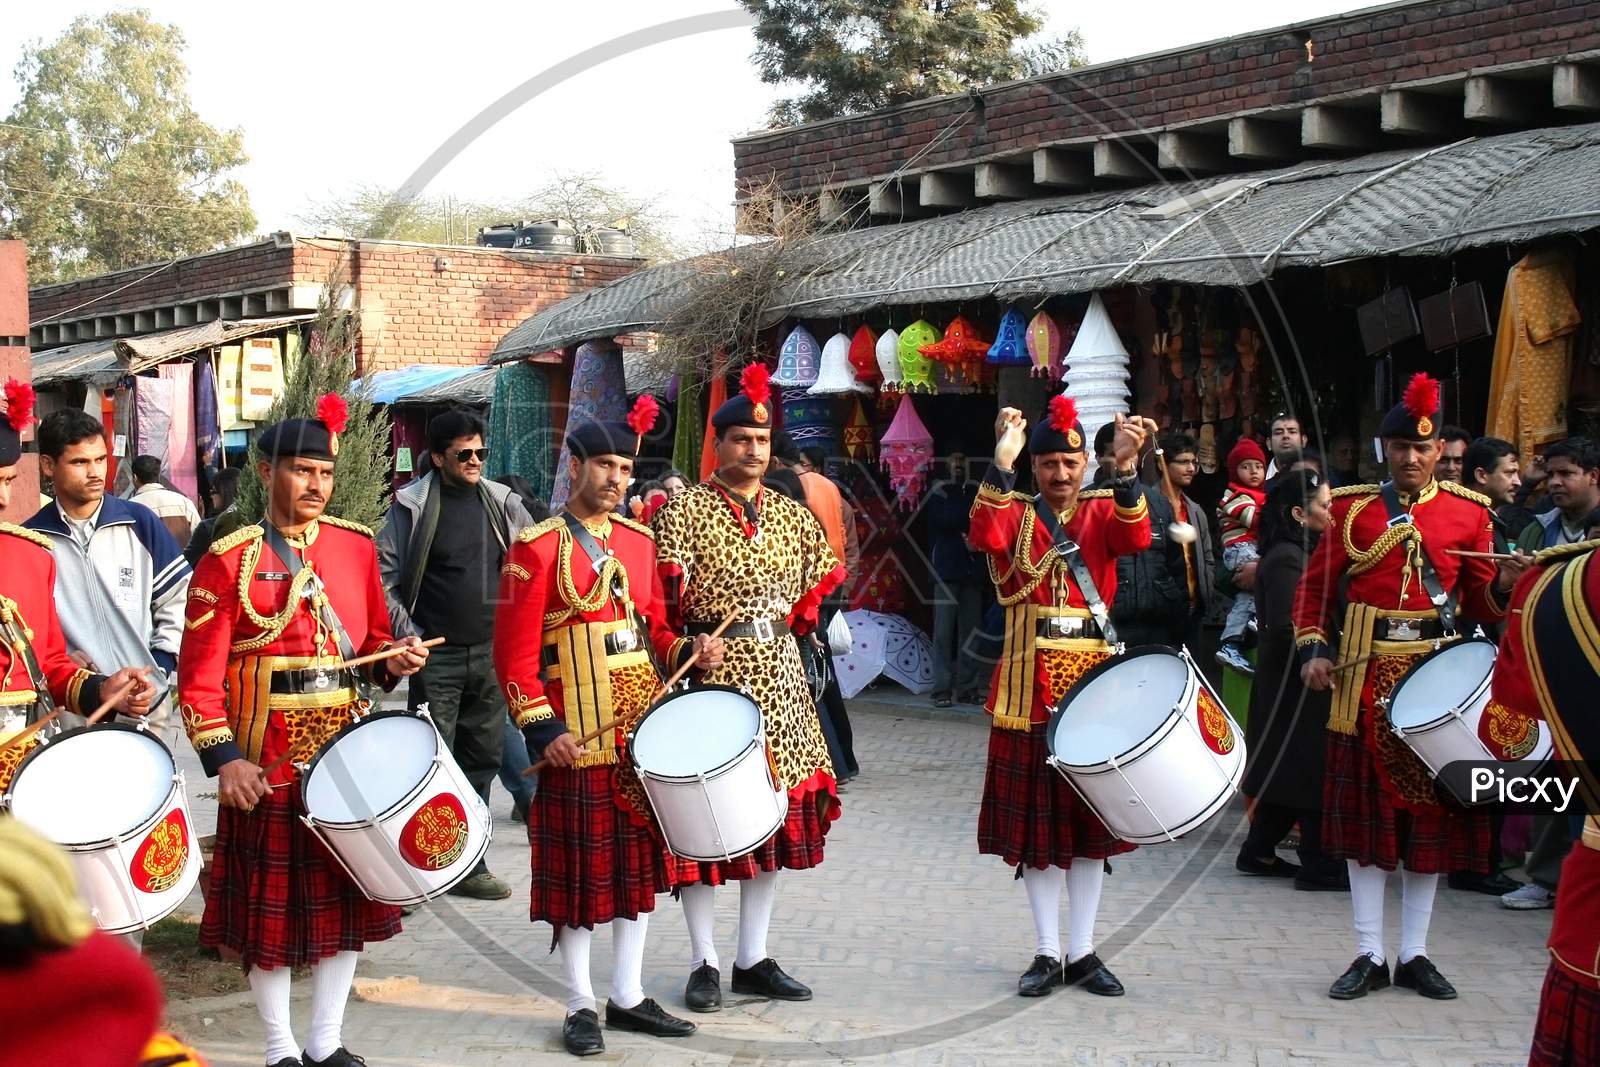 SSB parade playing drums and bagpipes at Dilli Haat